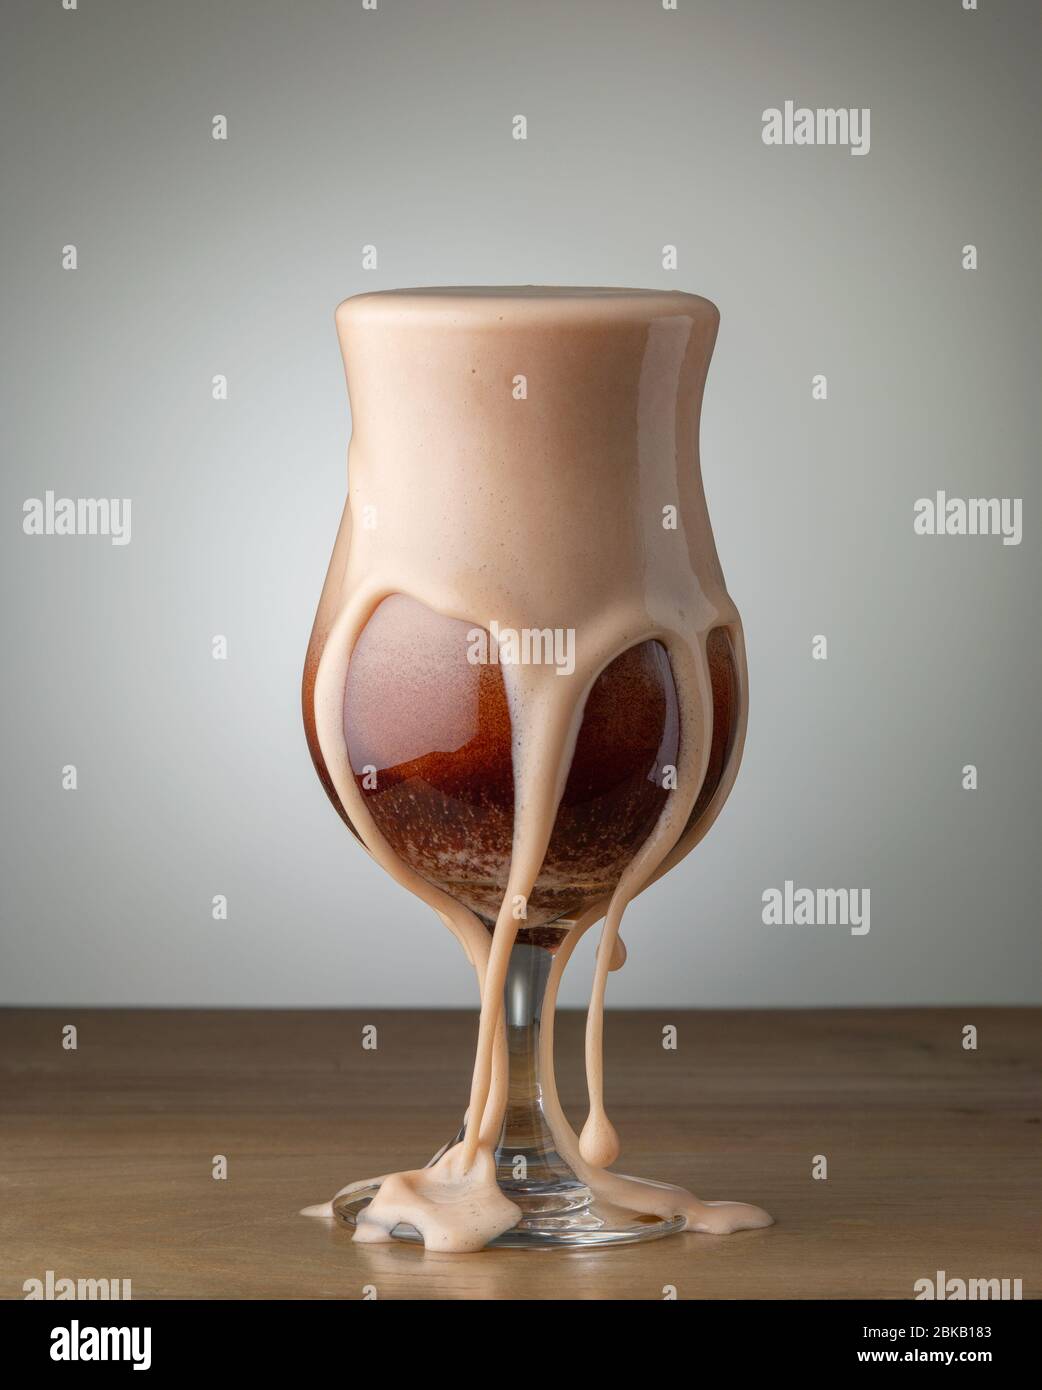 glass of beer cocktail with foam splashes on wood bar table Stock Photo